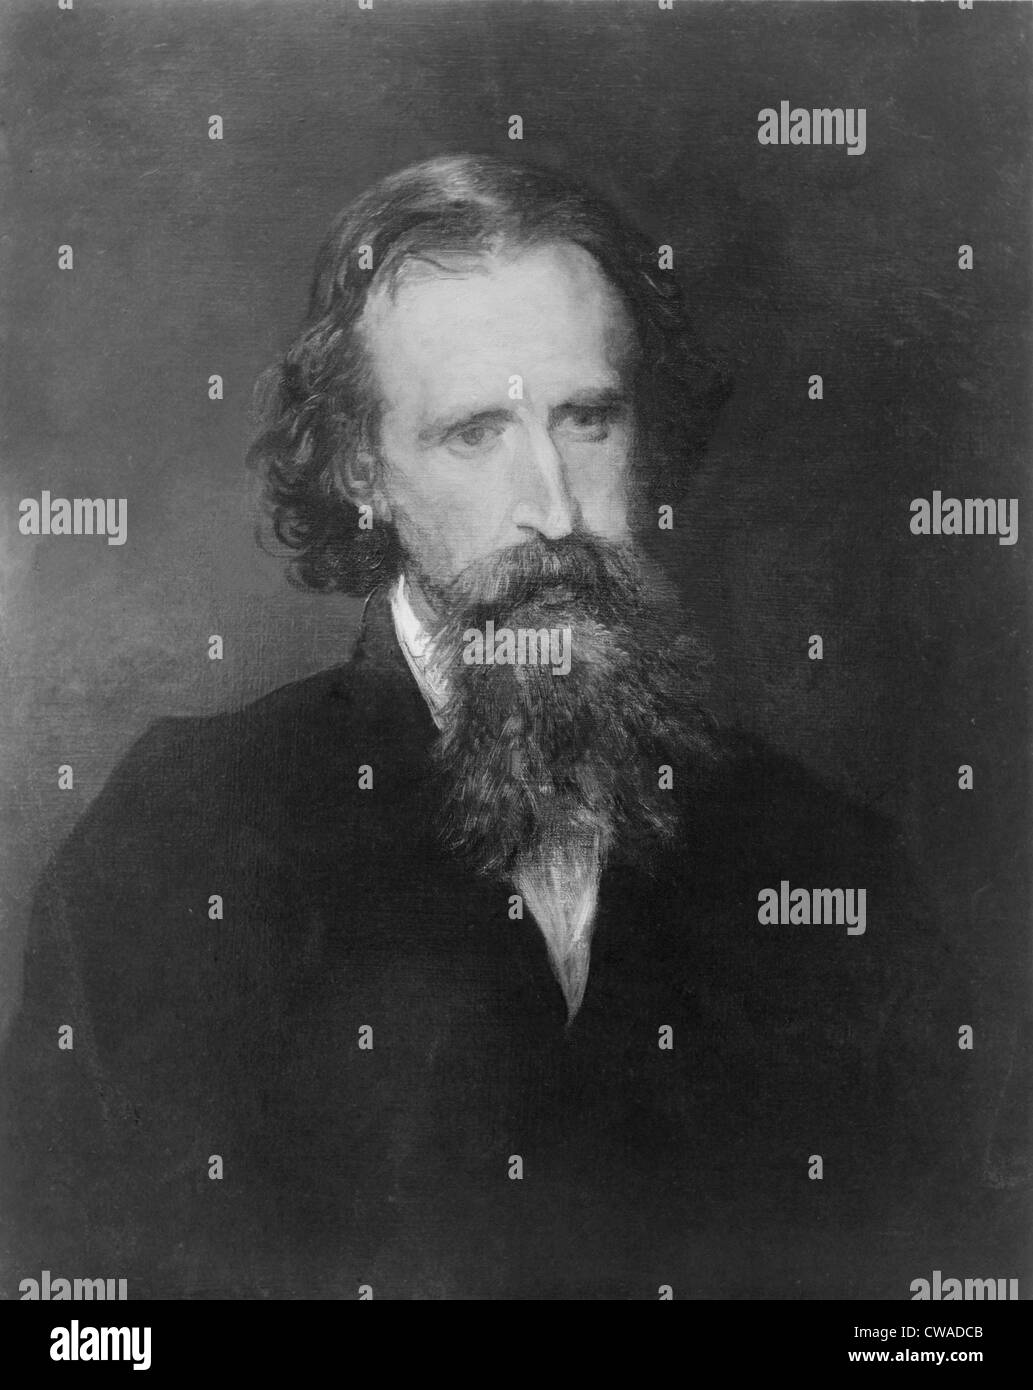 Leslie Stephen (1832-1904), prominent 19th century English philosopher and editor. Stock Photo